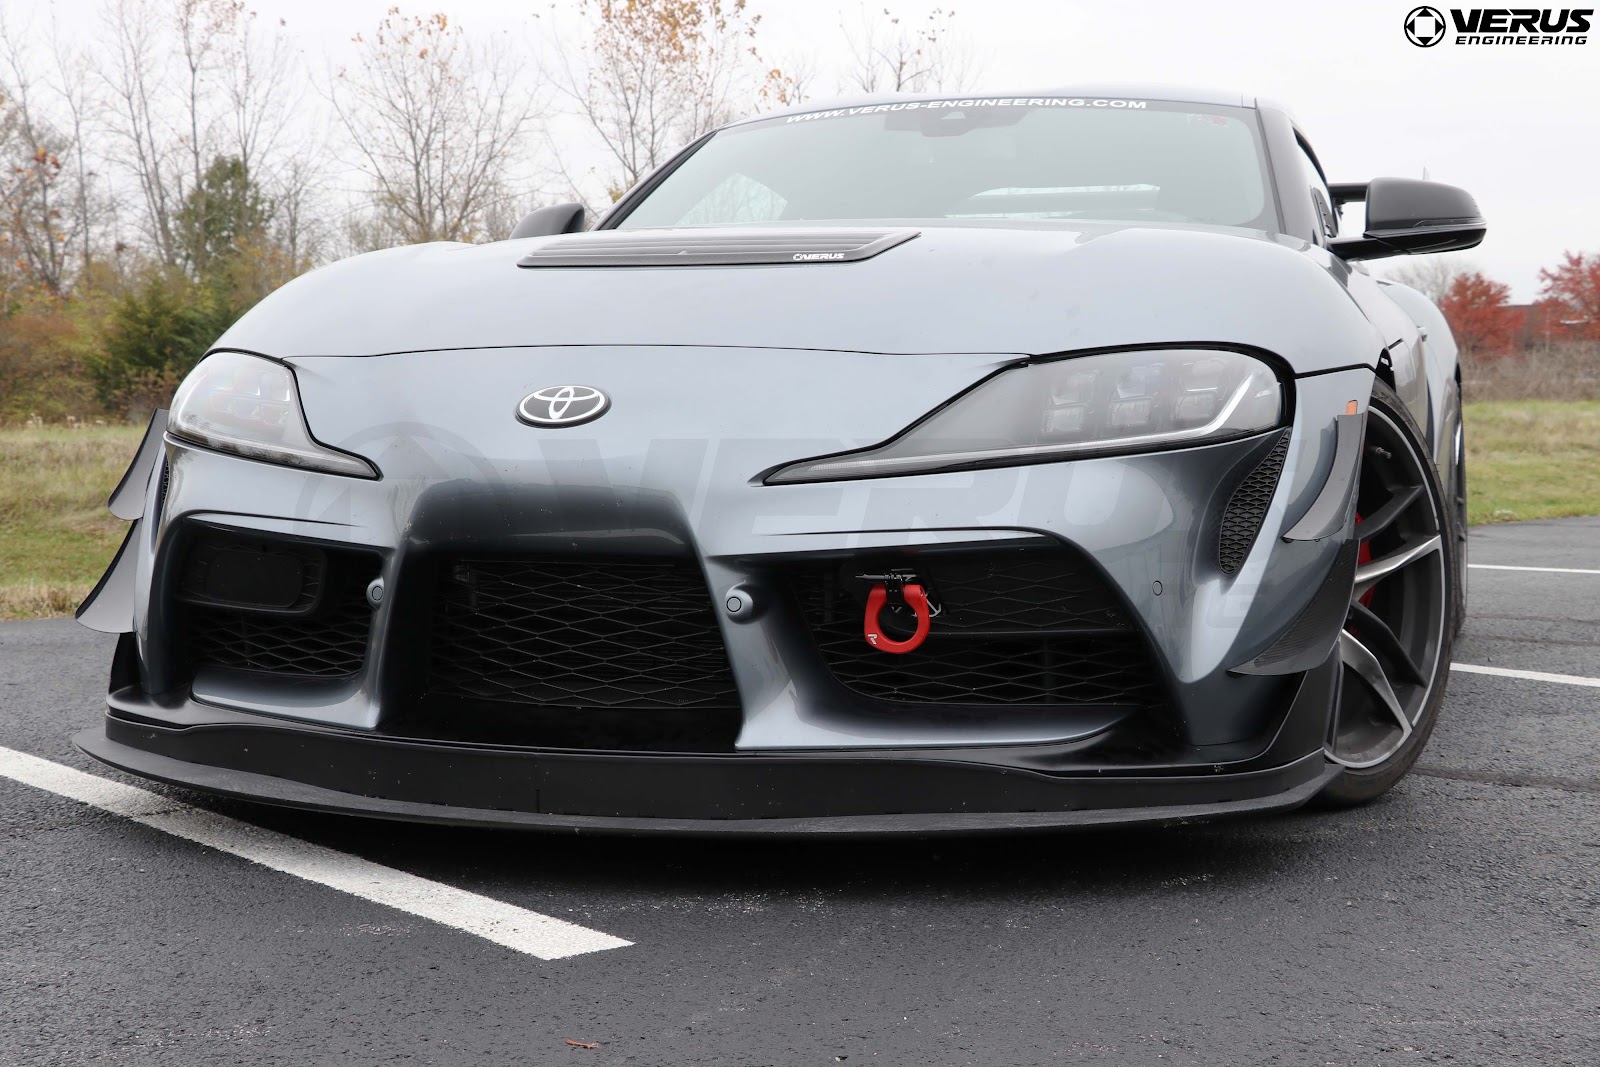 Toyota Supra MK5 with aftermarket front splitter and dive planes